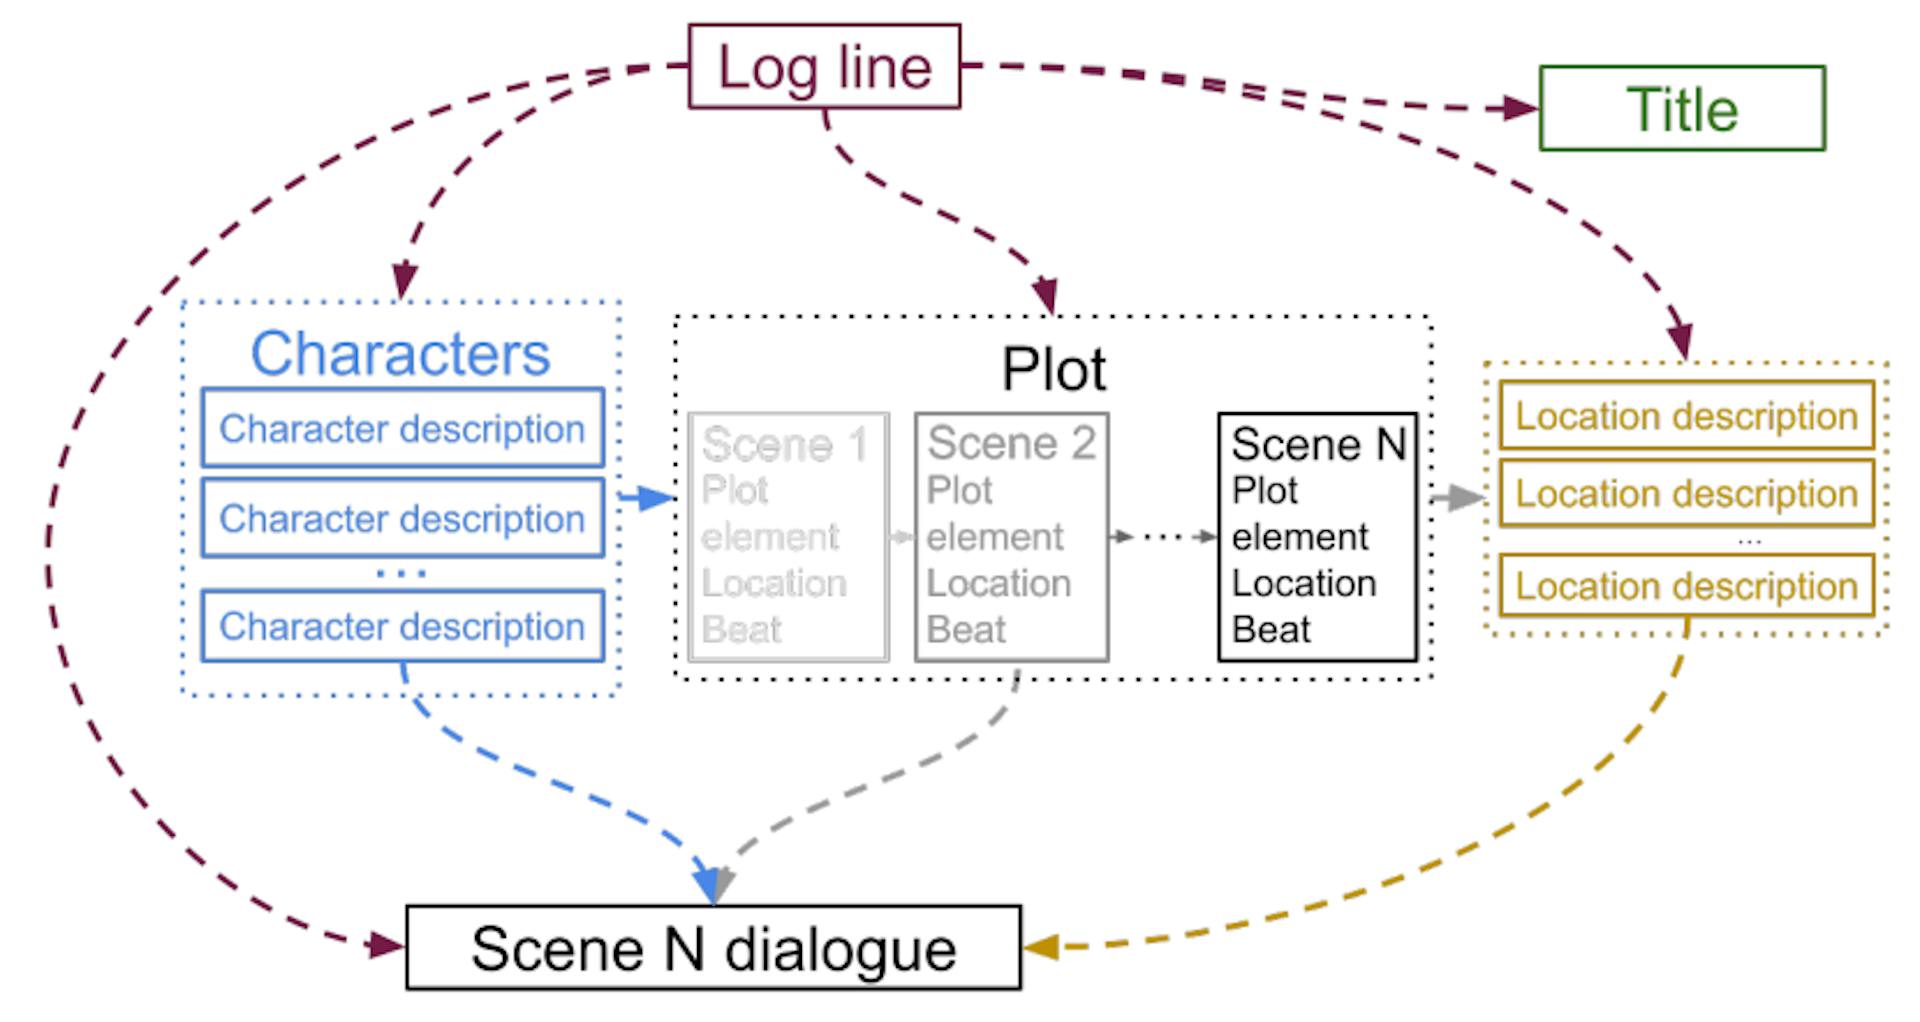 Fig. 1. Dramatron’s Hierarchical Coherent Story Generation. Dramatron starts from a log line to generate a title and characters. Characters generated are used as prompts to generate a sequence of scene summaries in the plot. Descriptions are subsequently generated for each unique location. Finally, these elements are all combined to generate dialogue for each scene. The arrows in the figure indicate how text generated is used to construct prompts for further LLM text generation.